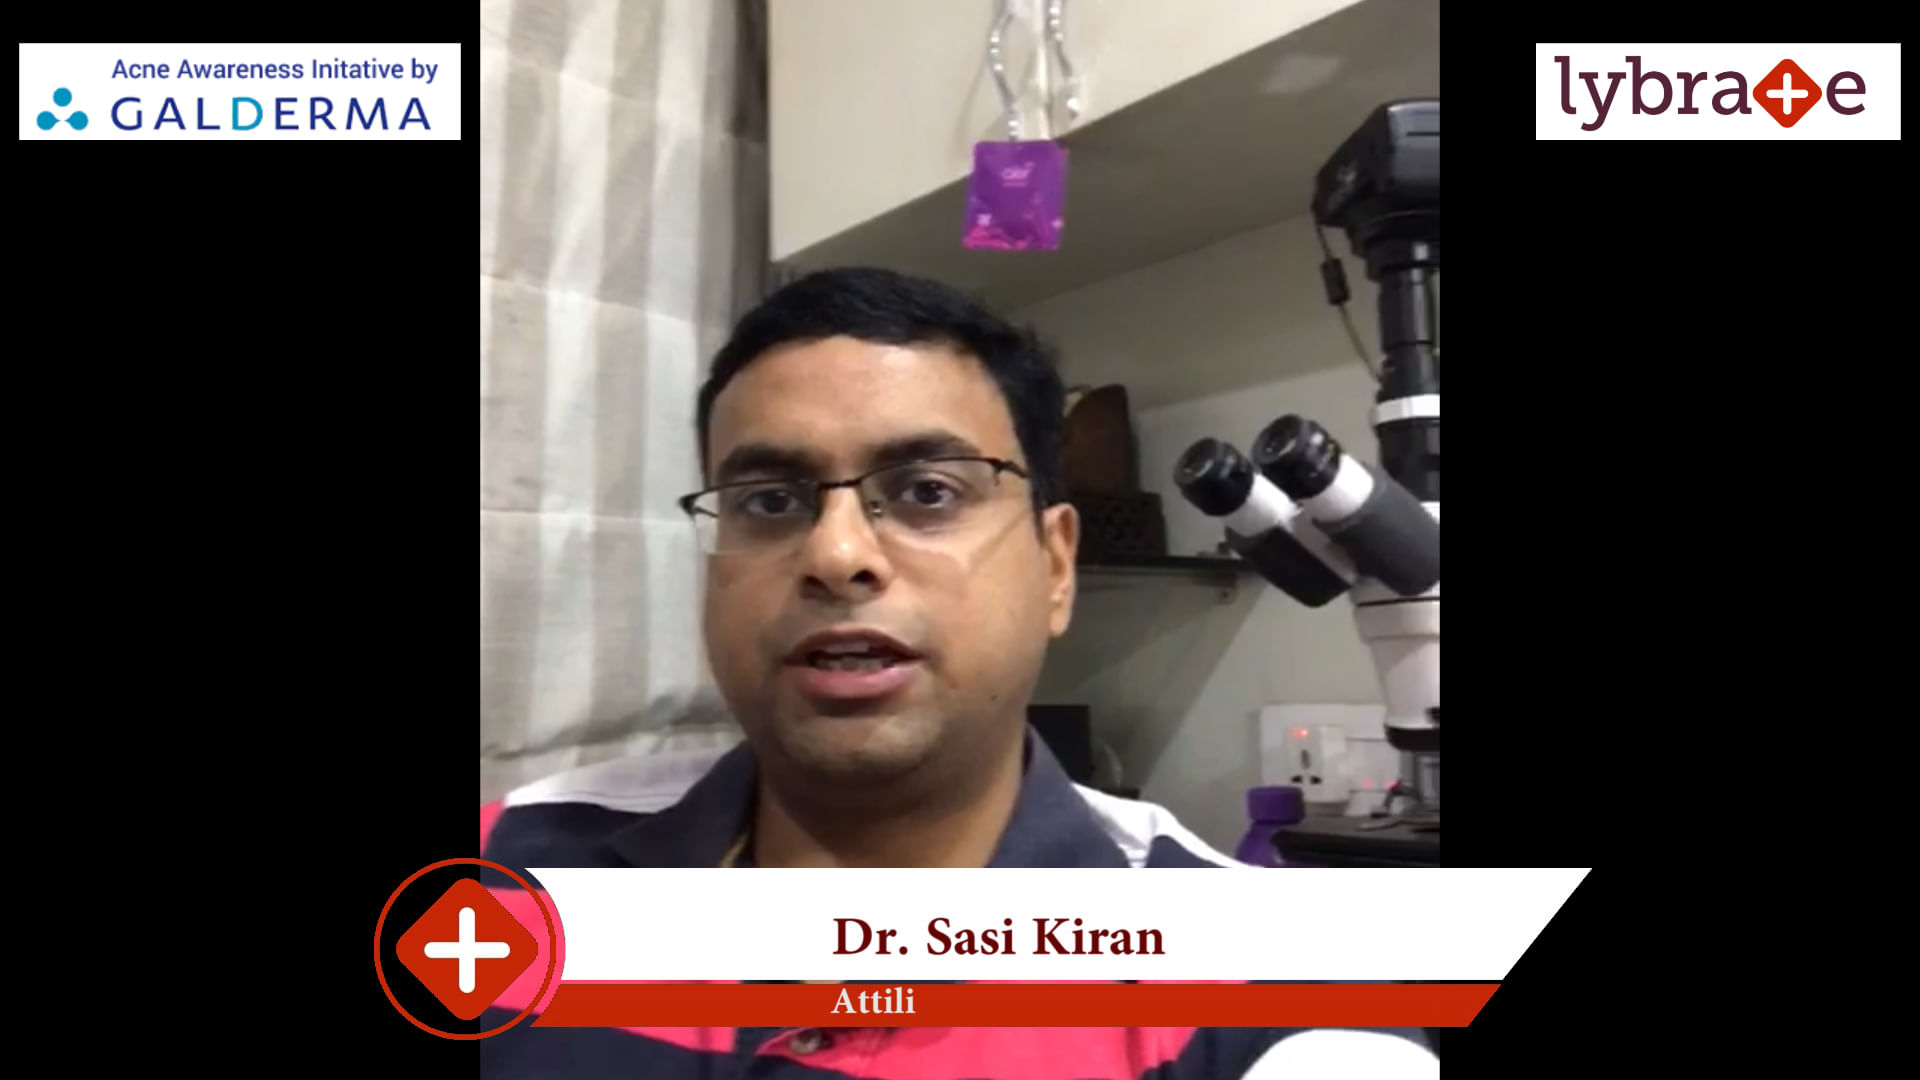 Lybrate | Dr. Sasi Kiran speaks on IMPORTANCE OF TREATING ACNE EARLY